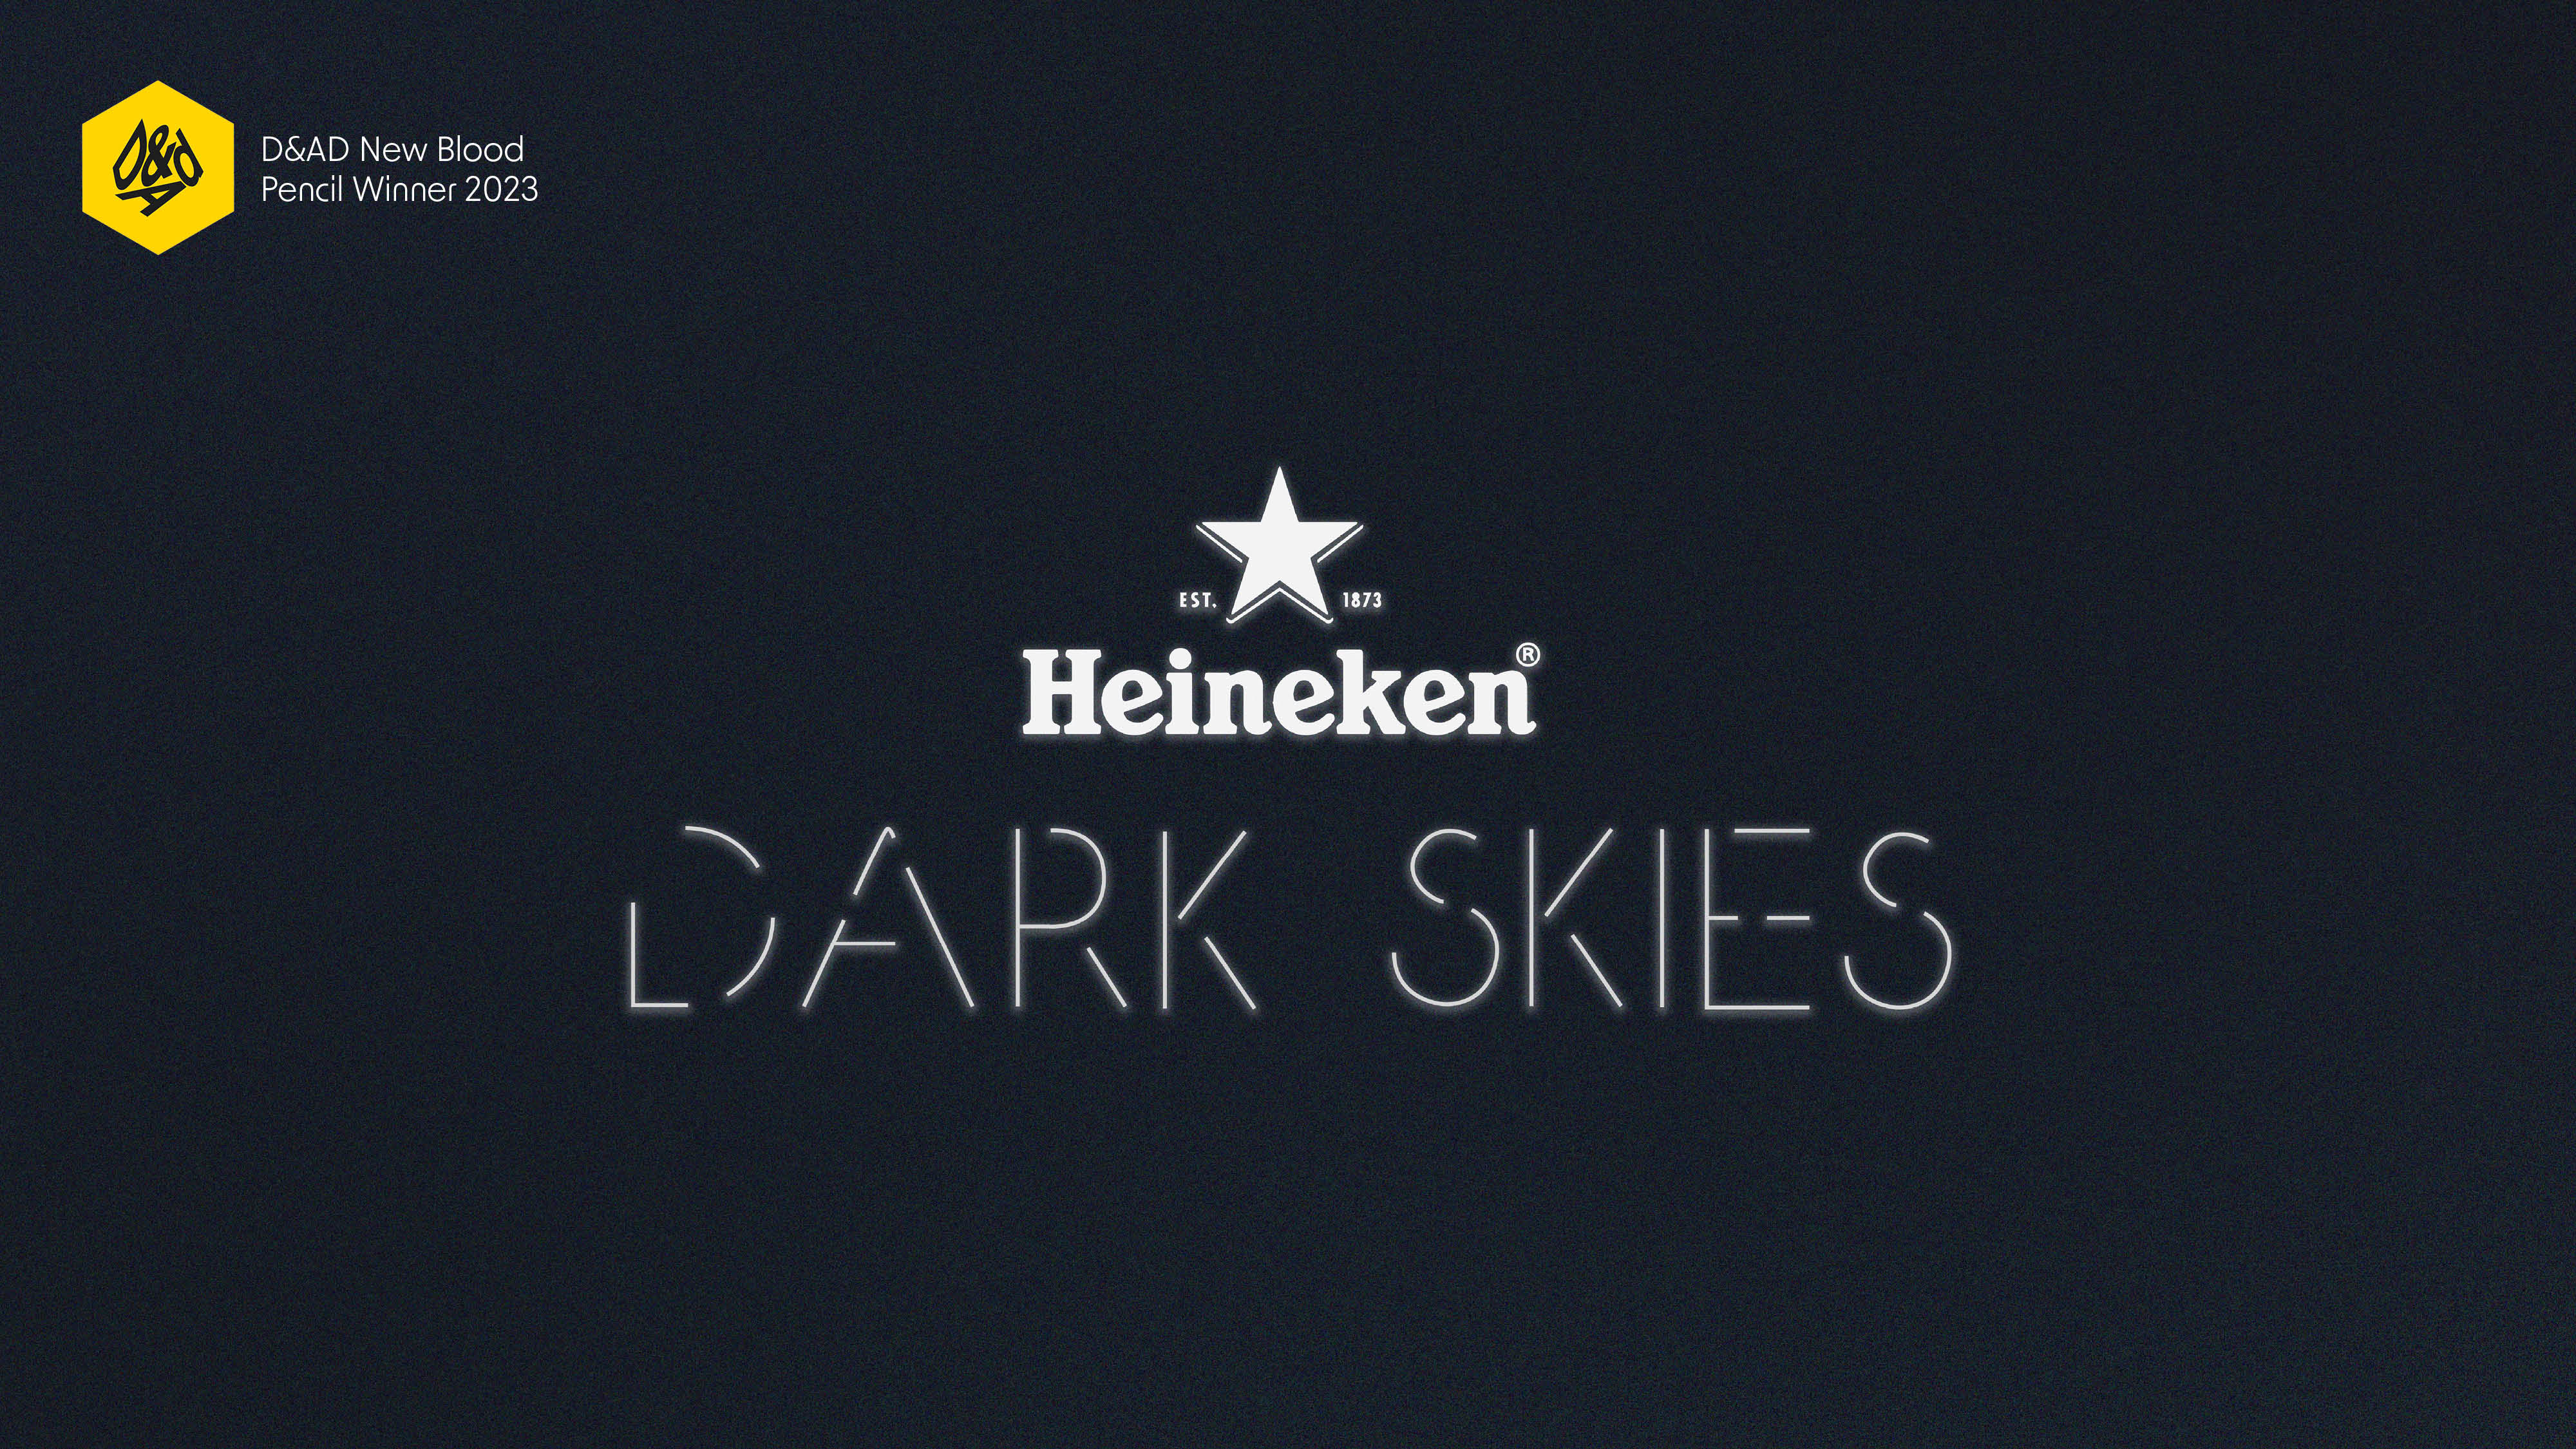 Video for Dark Skies campaign, explaining how Heineken are helping reduce their impact on light pollution.